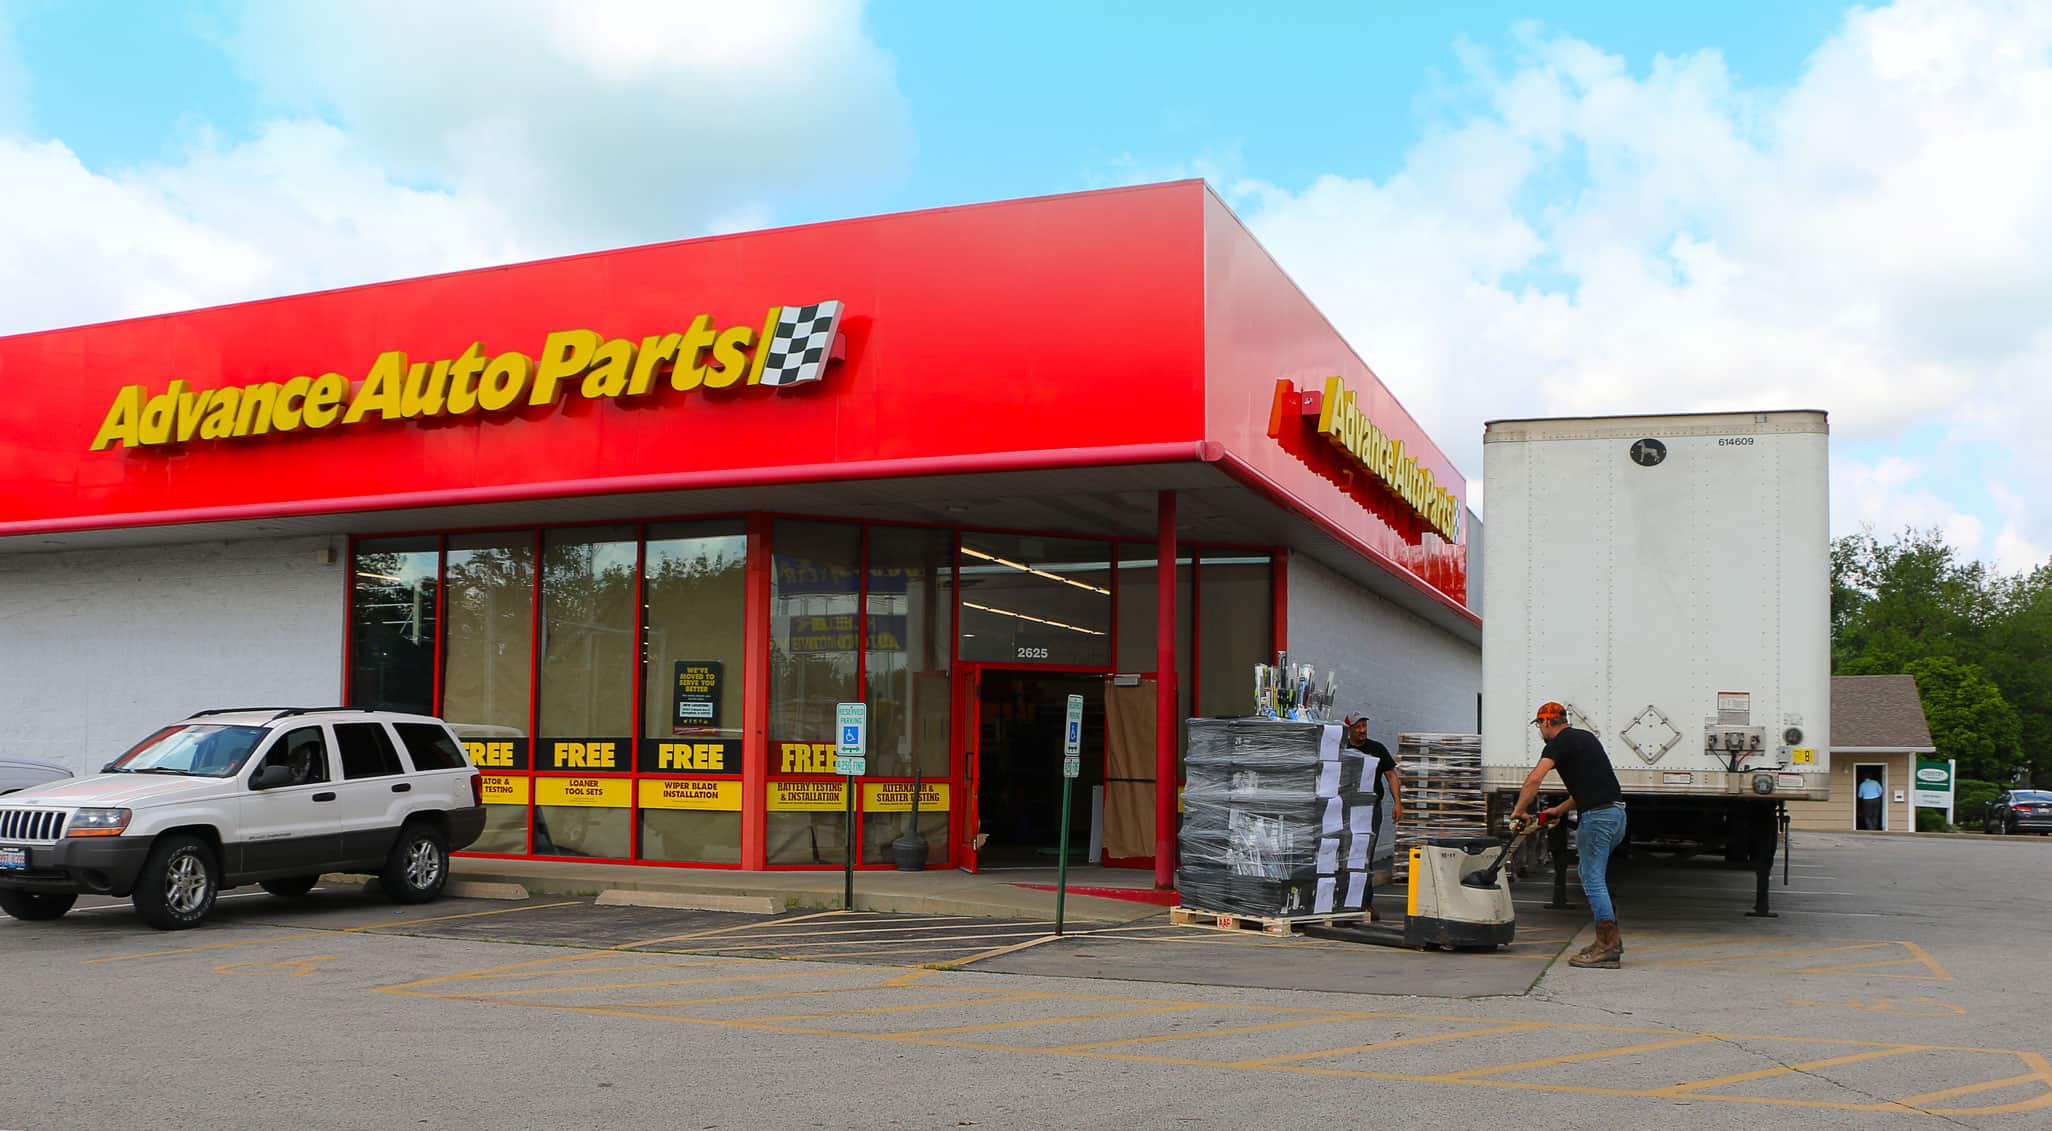 Equities Analysts Set Expectations for Advance Auto Parts, Inc.’s Q1 2019 Earnings (NYSEAAP